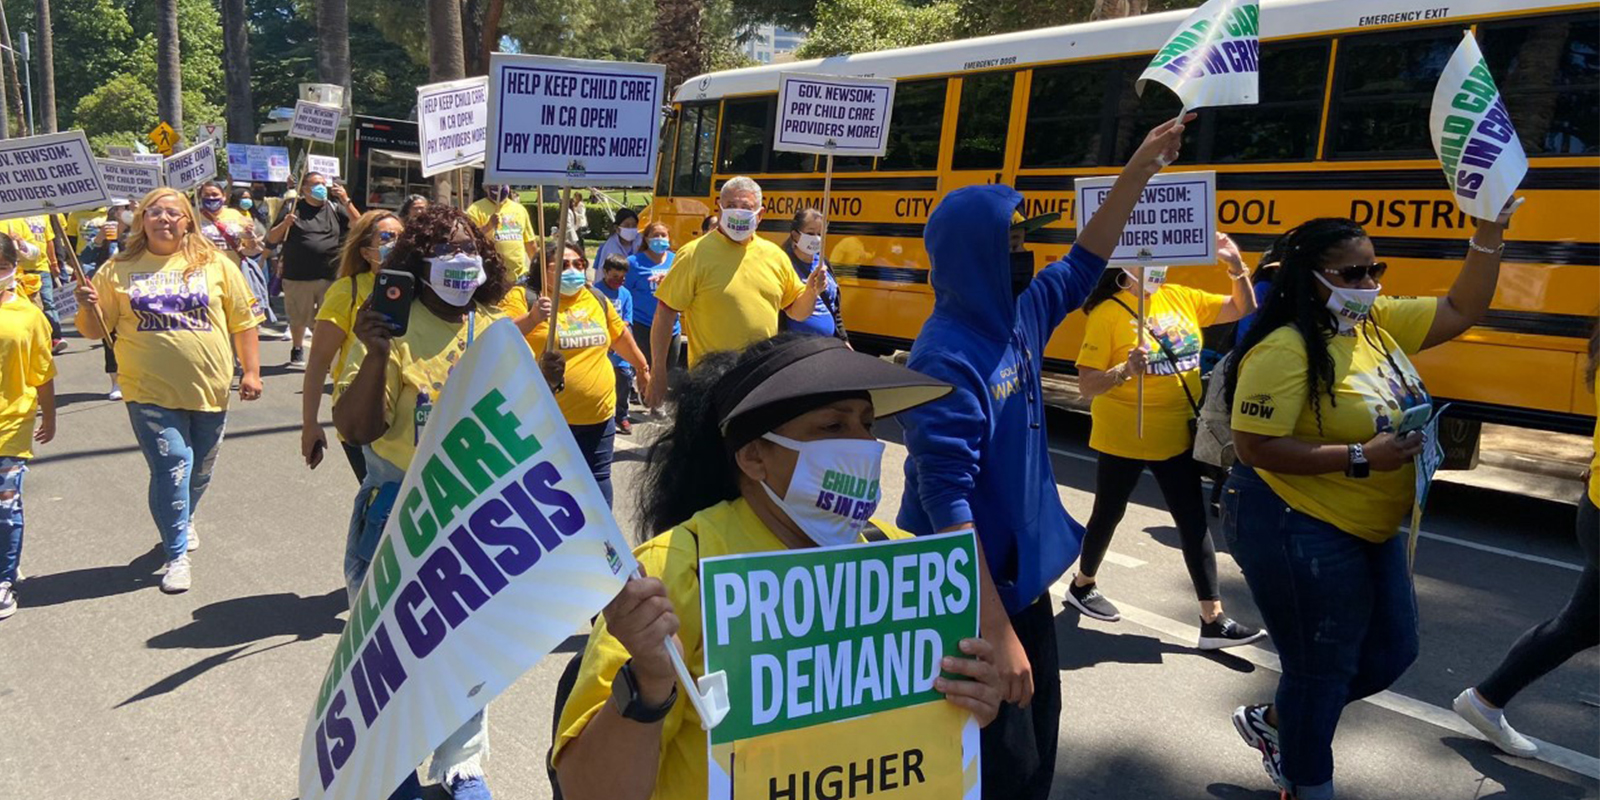 California child care providers demand higher wages